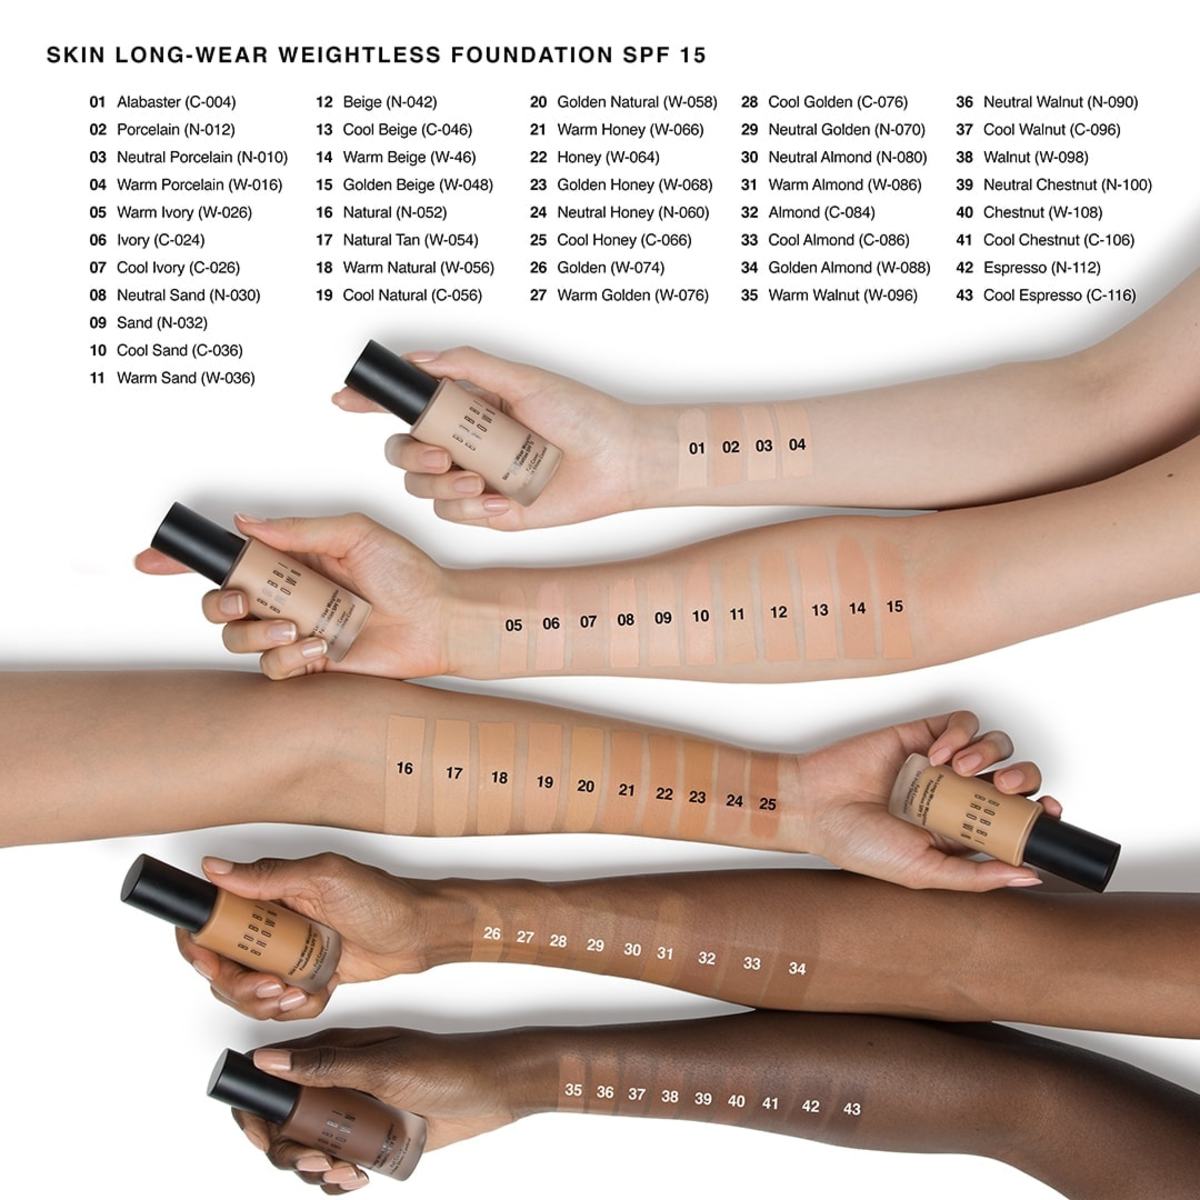 The foundation provides a vast variety of shades for different skin tones